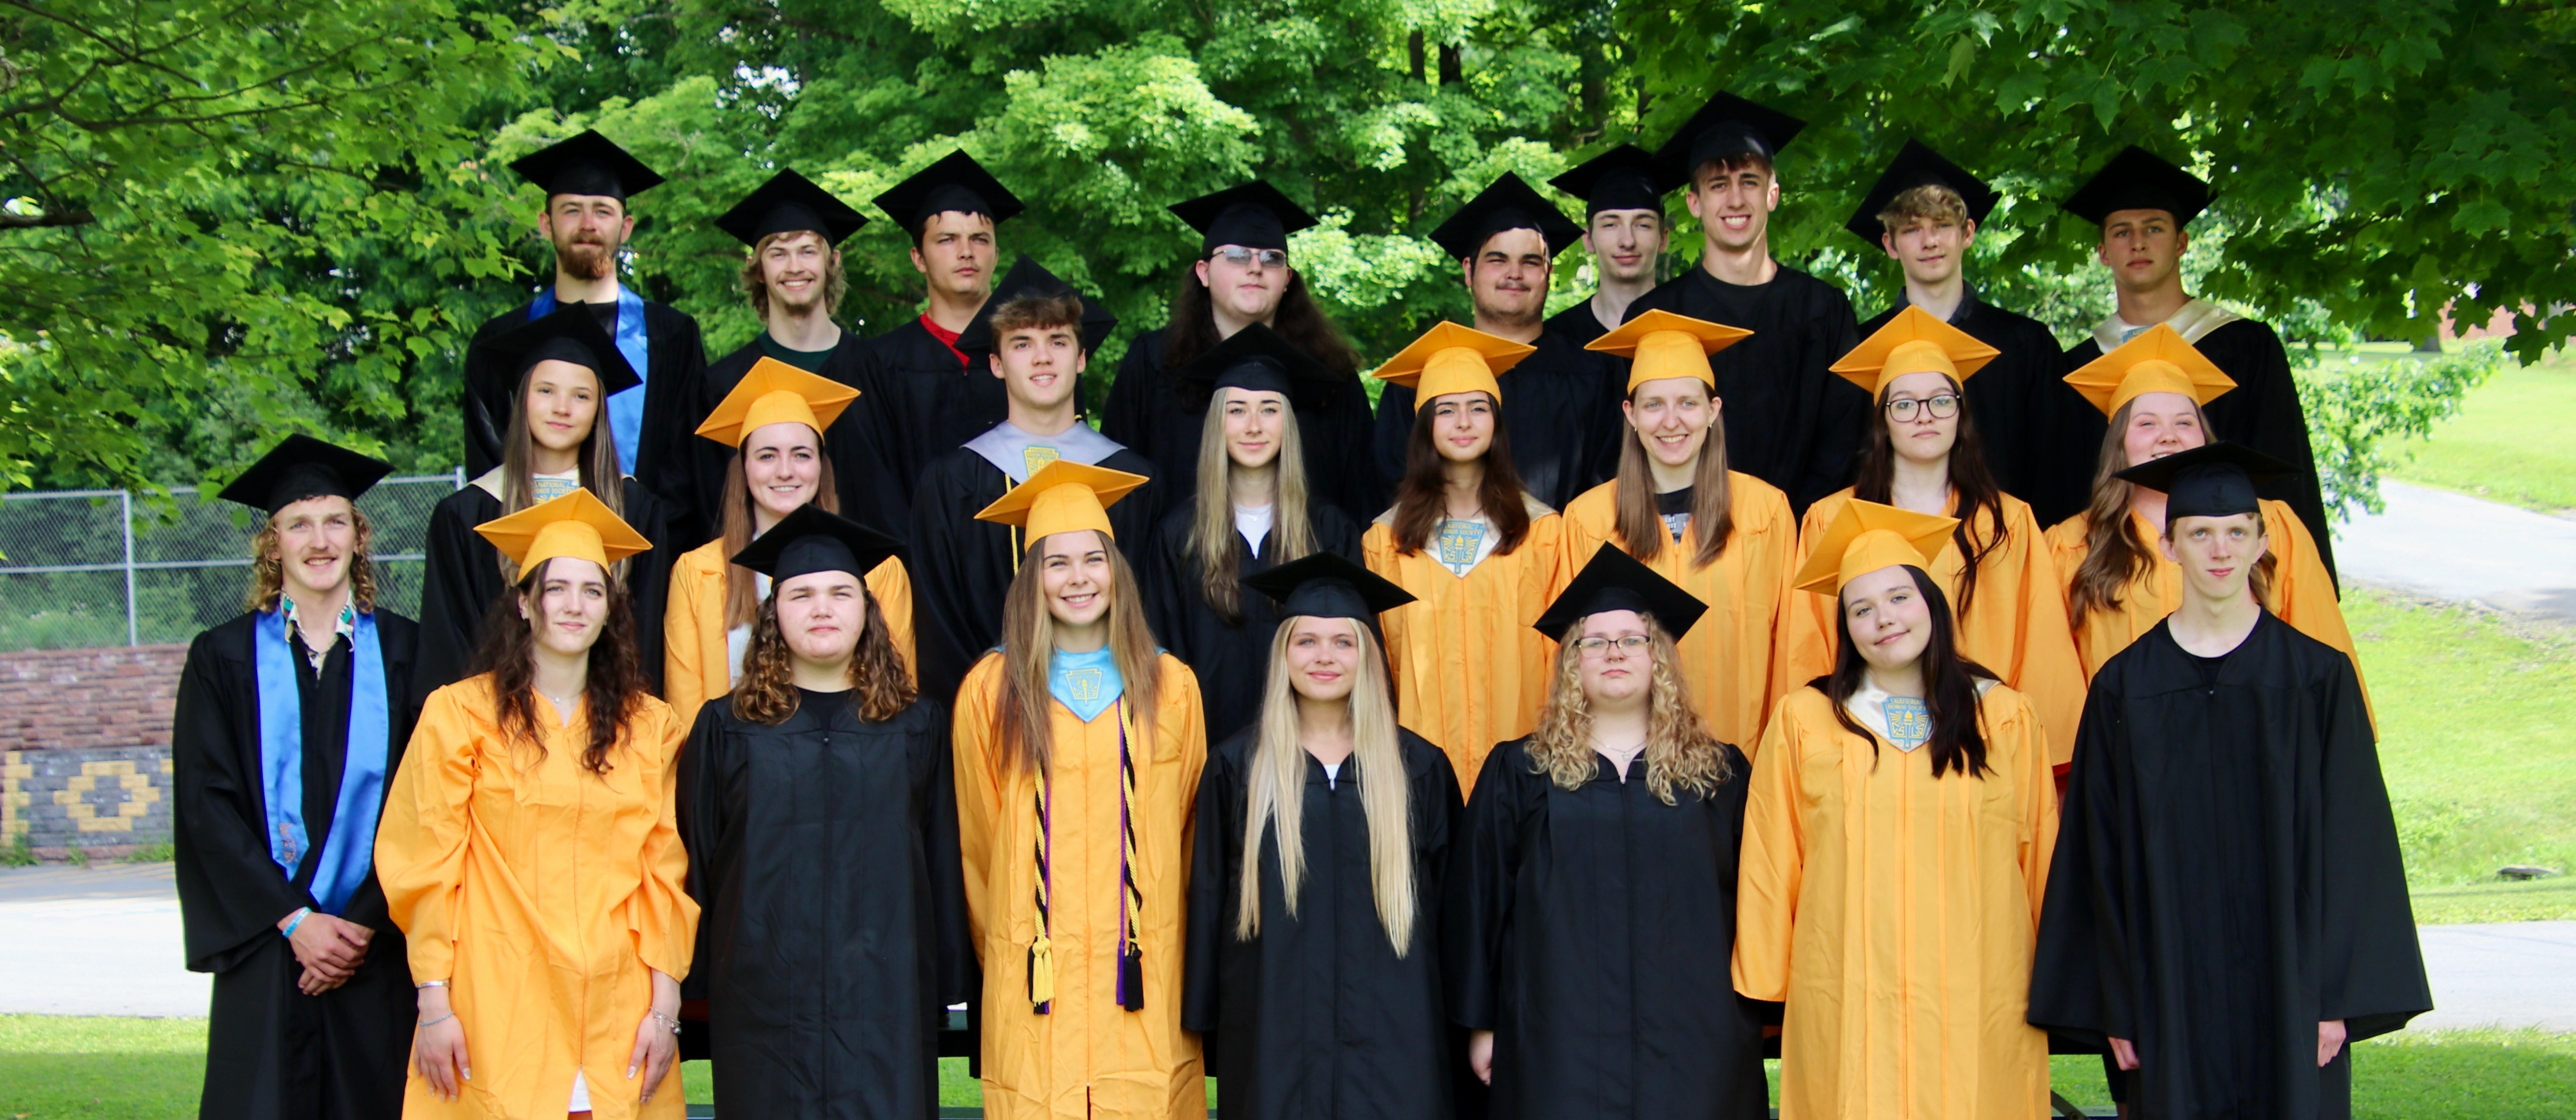 A small high school graduating class dressed in gold and black graduation gowns